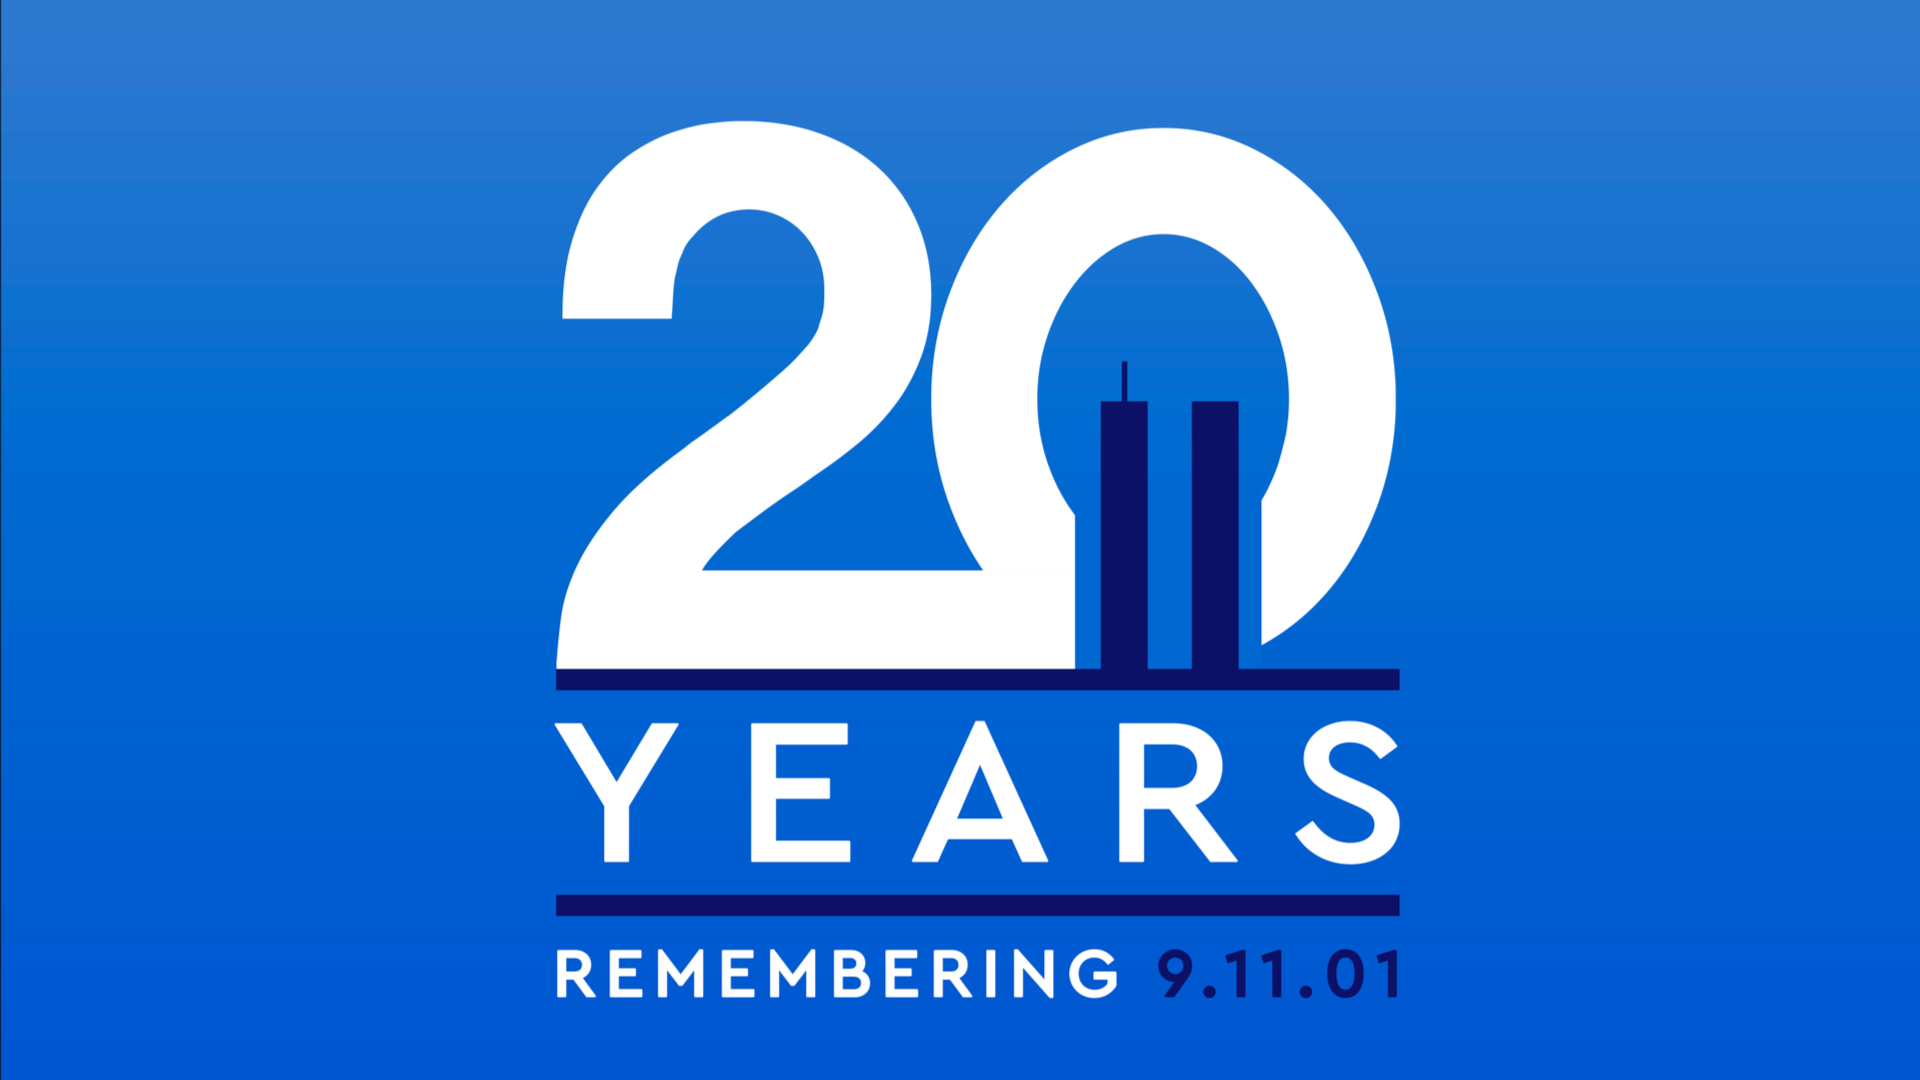 Link to virtual town hall remembering 9/11 on the 20th anniversary.